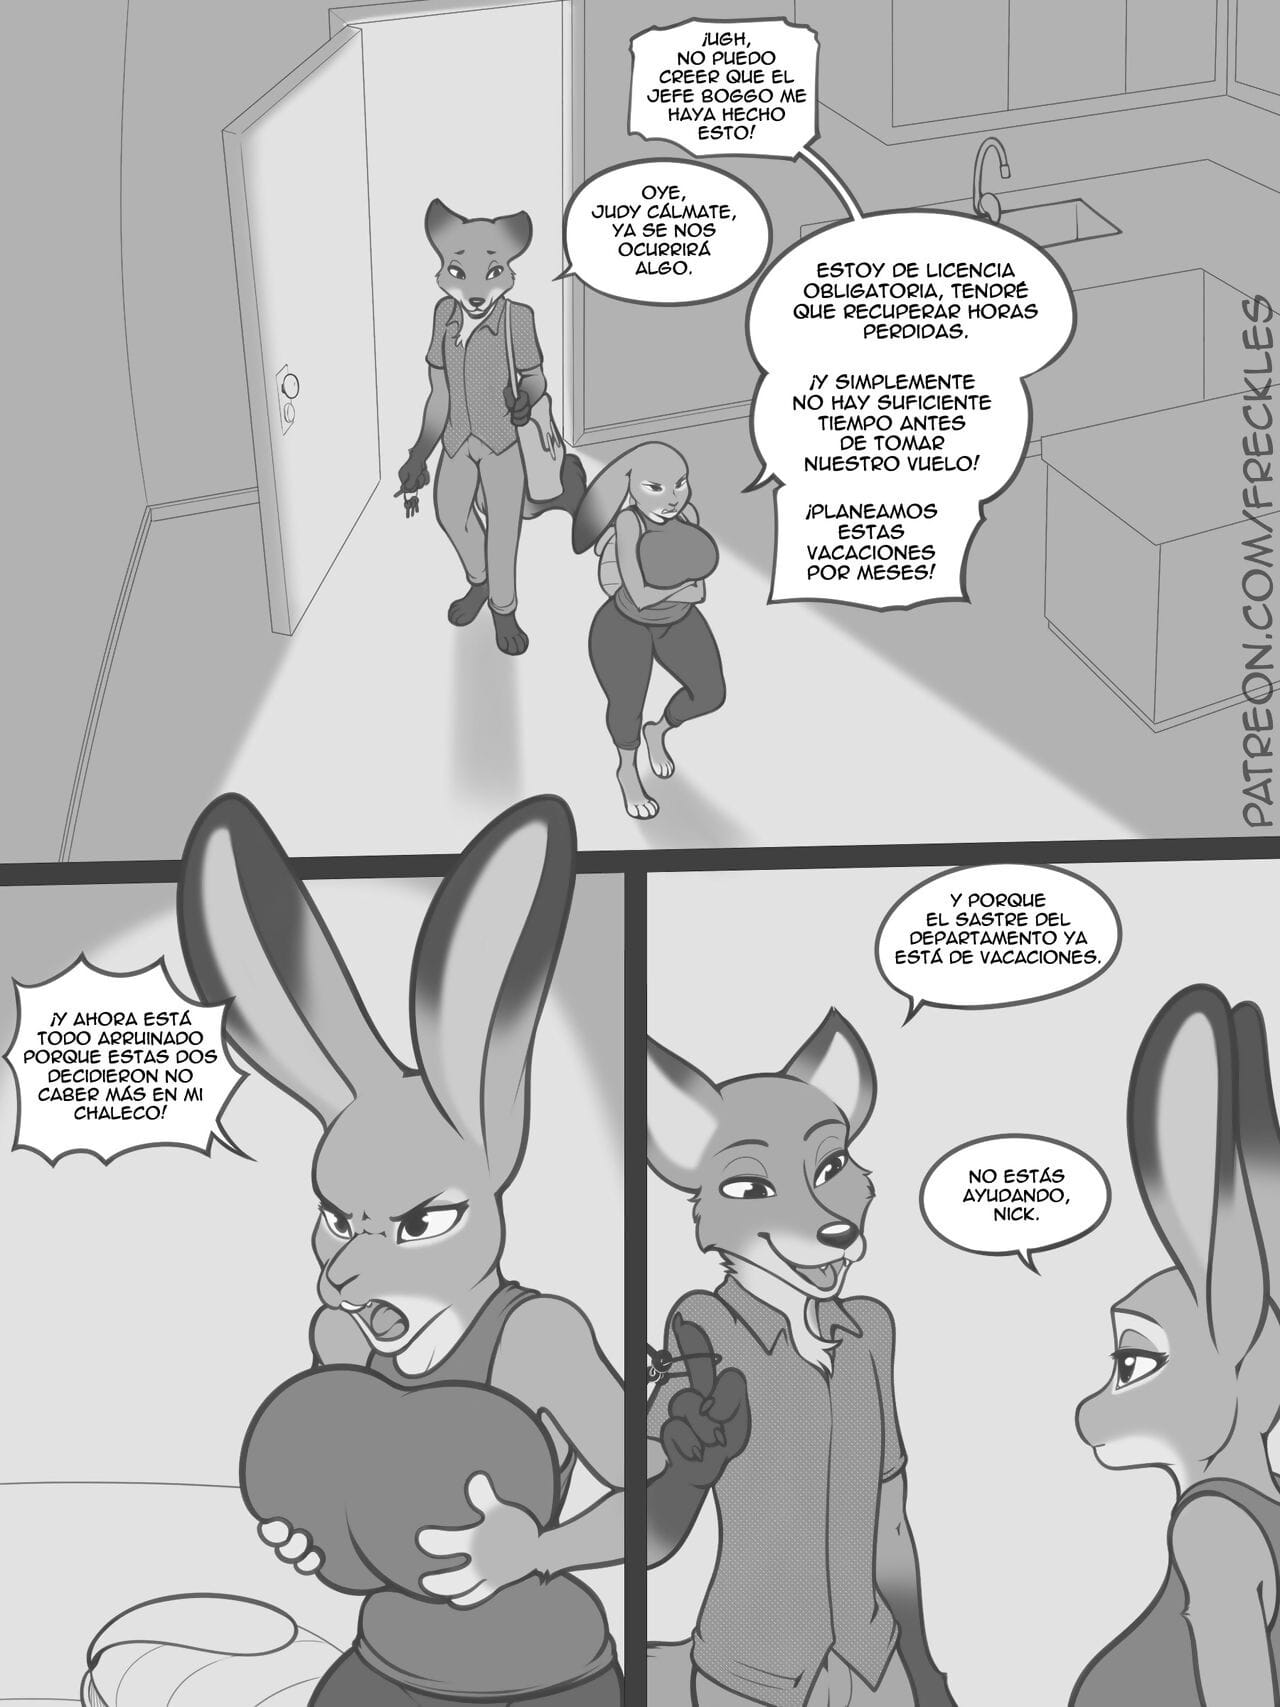 busted!/reventar! page 1